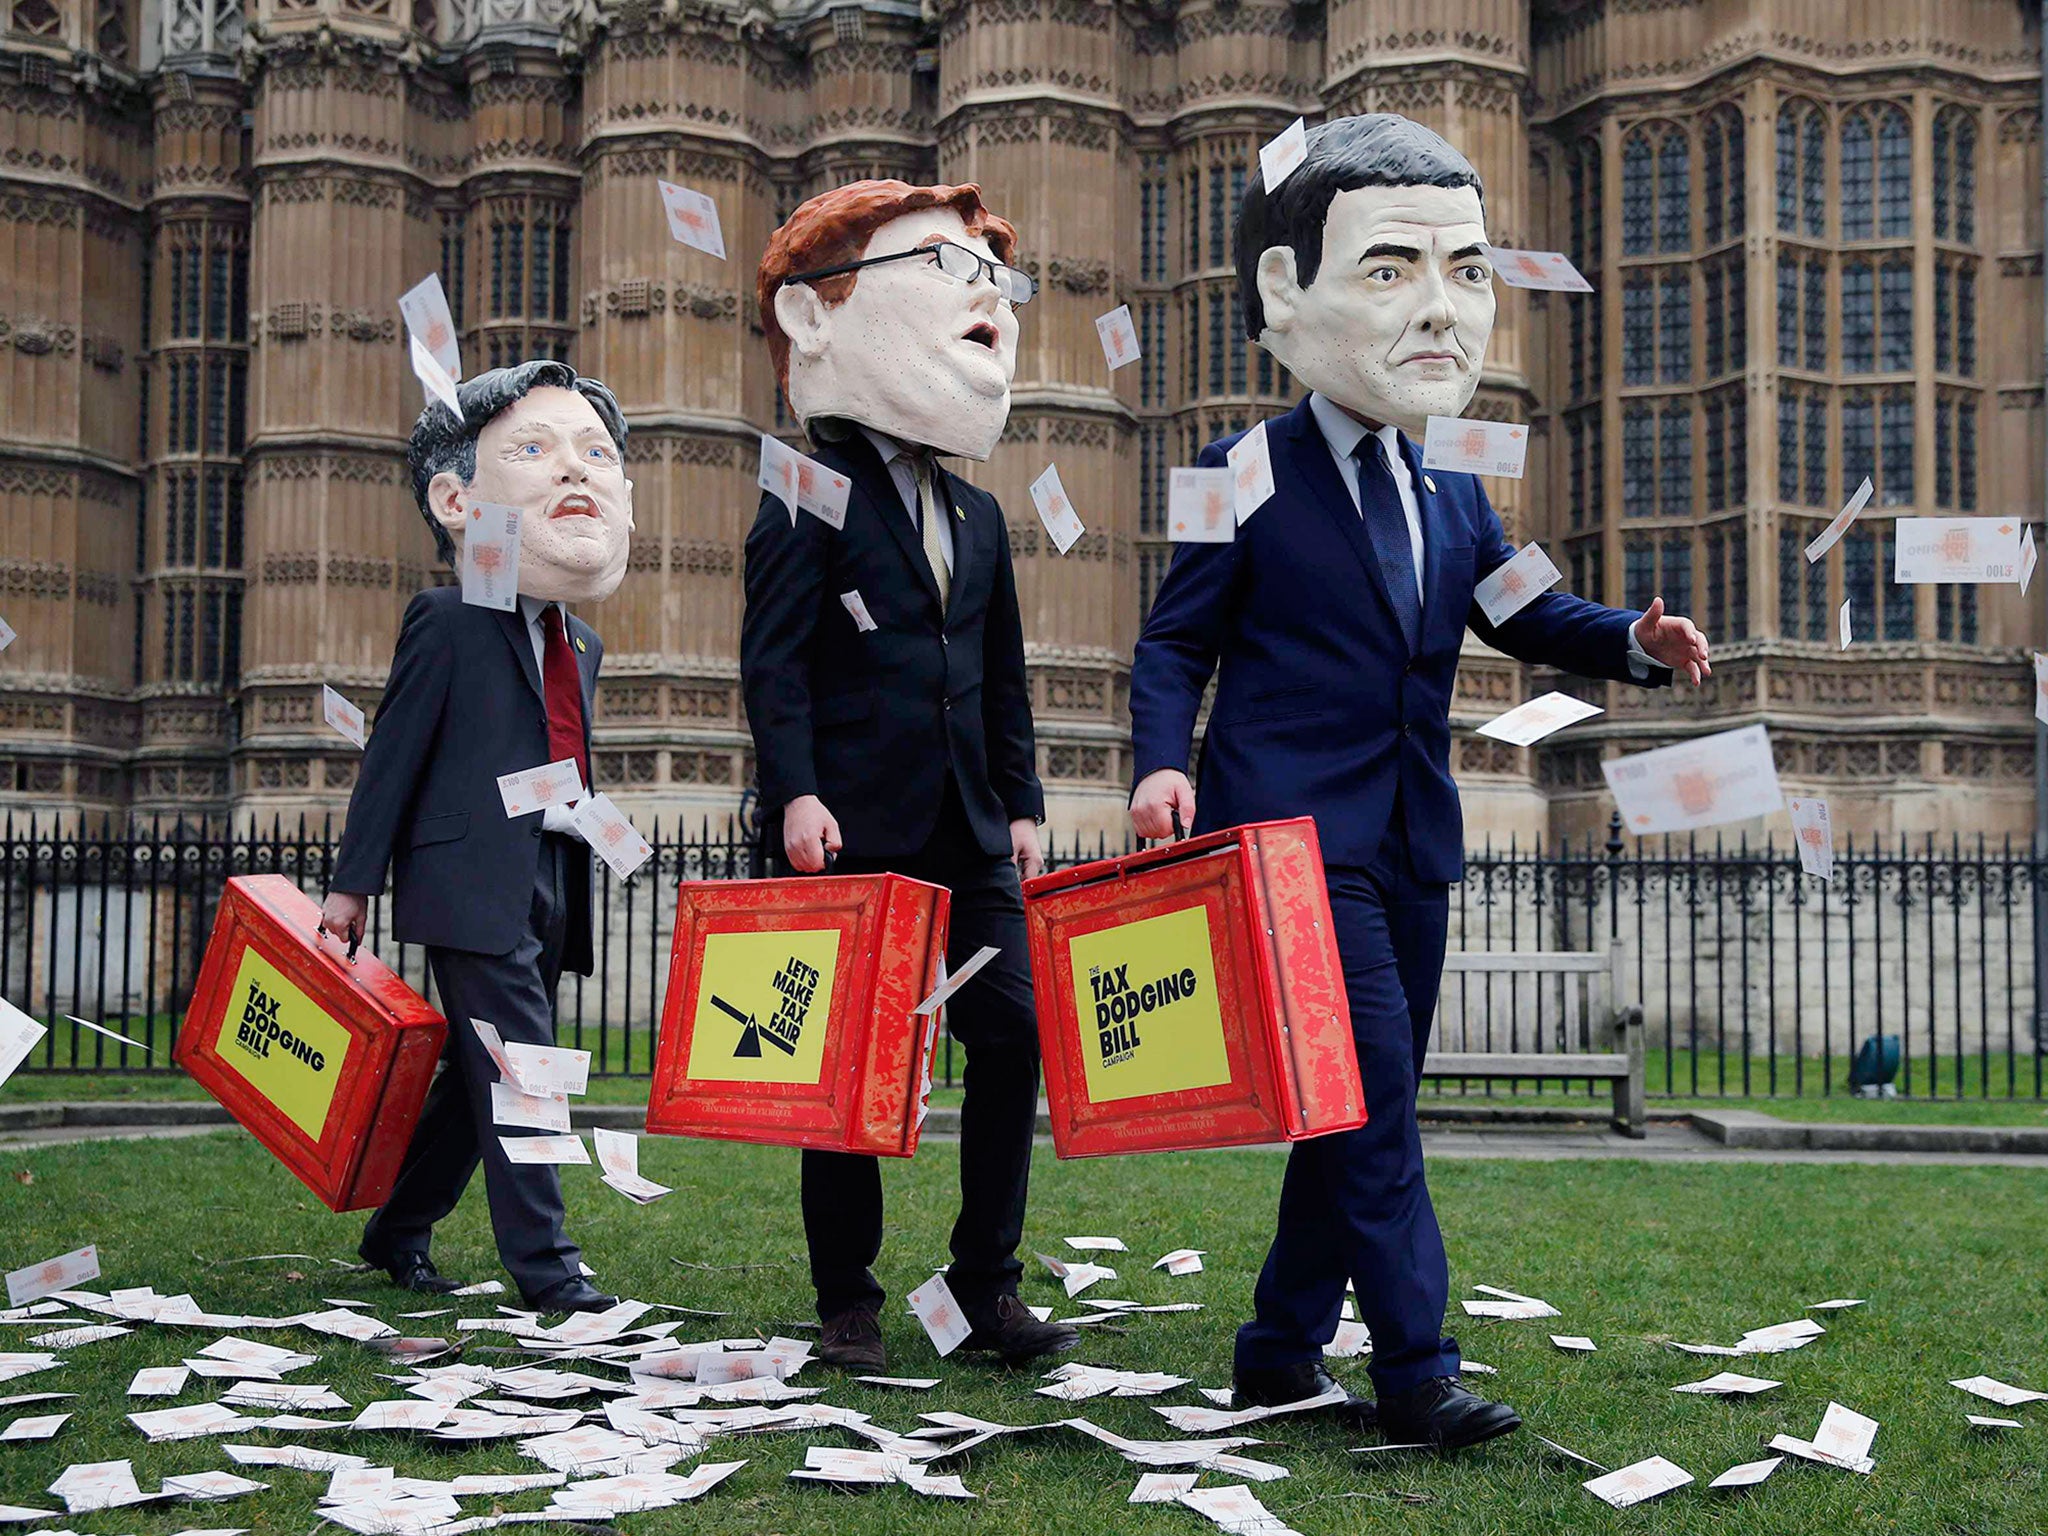 Campaigners from the Tax Dodging Bill campaign dressed up as Britain's shadow Chancellor of the Exchequer Ed Balls, Chief Secretary to the Treasury Danny Alexander, and Chancellor of the Exchequer George Osborne (L-R), participate in a publicity stunt acr